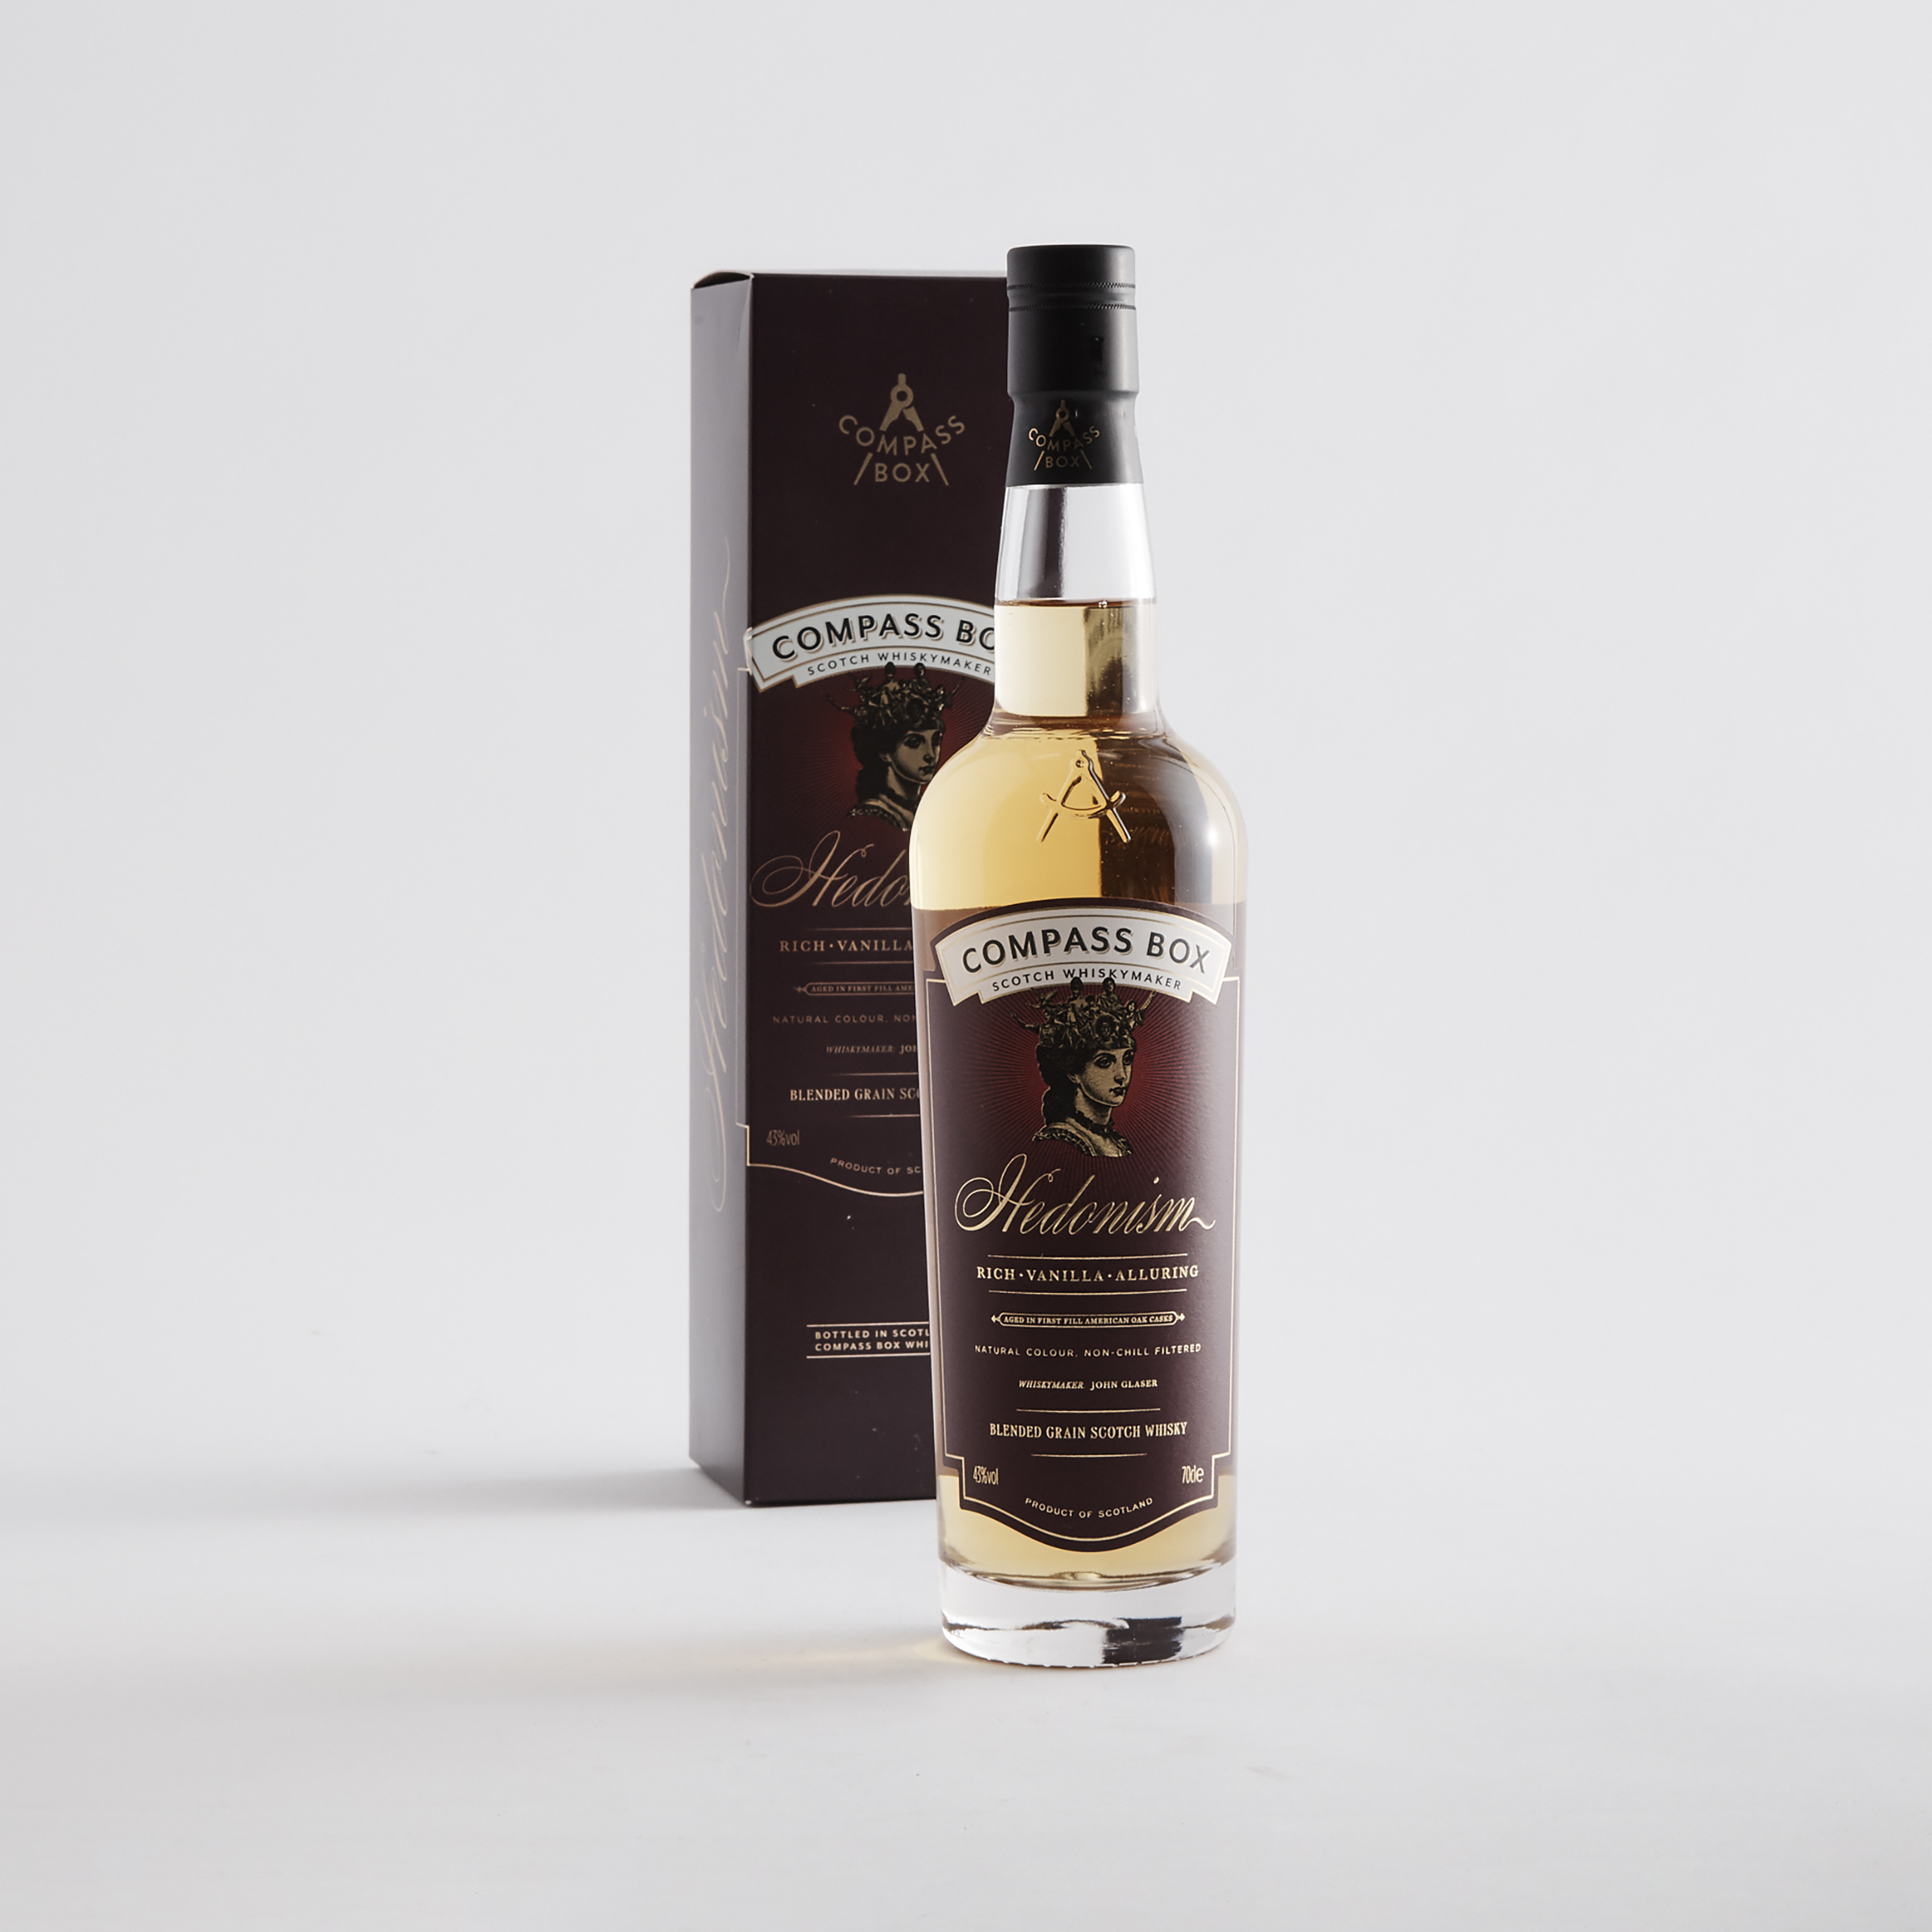 COMPASS BOX BLENDED GRAIN SCOTCH WHISKY NAS (ONE 70 CL)